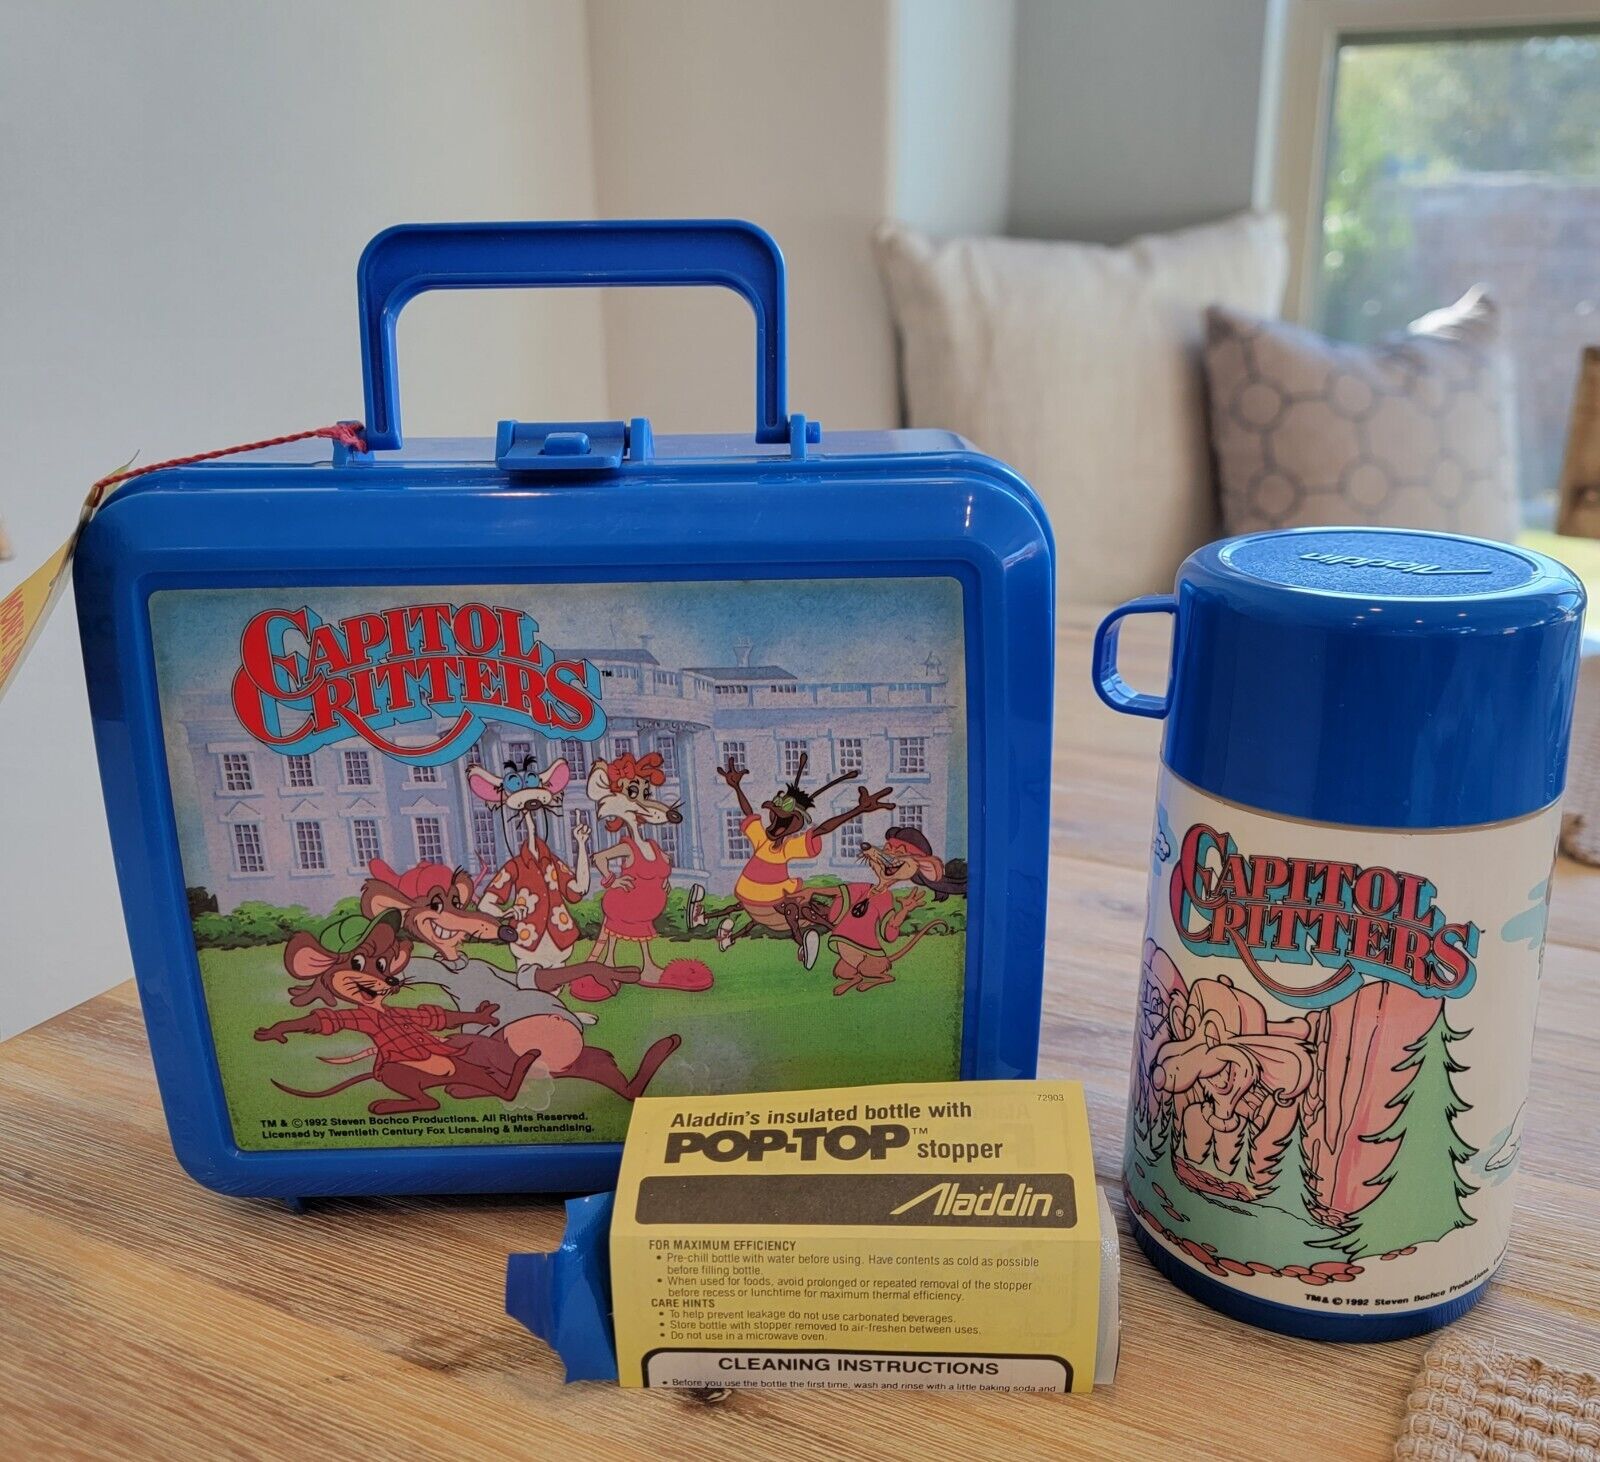 Vintage 1992 Capitol Critters Aladdin Blue Lunch Box & Thermos Set 72907 NEW